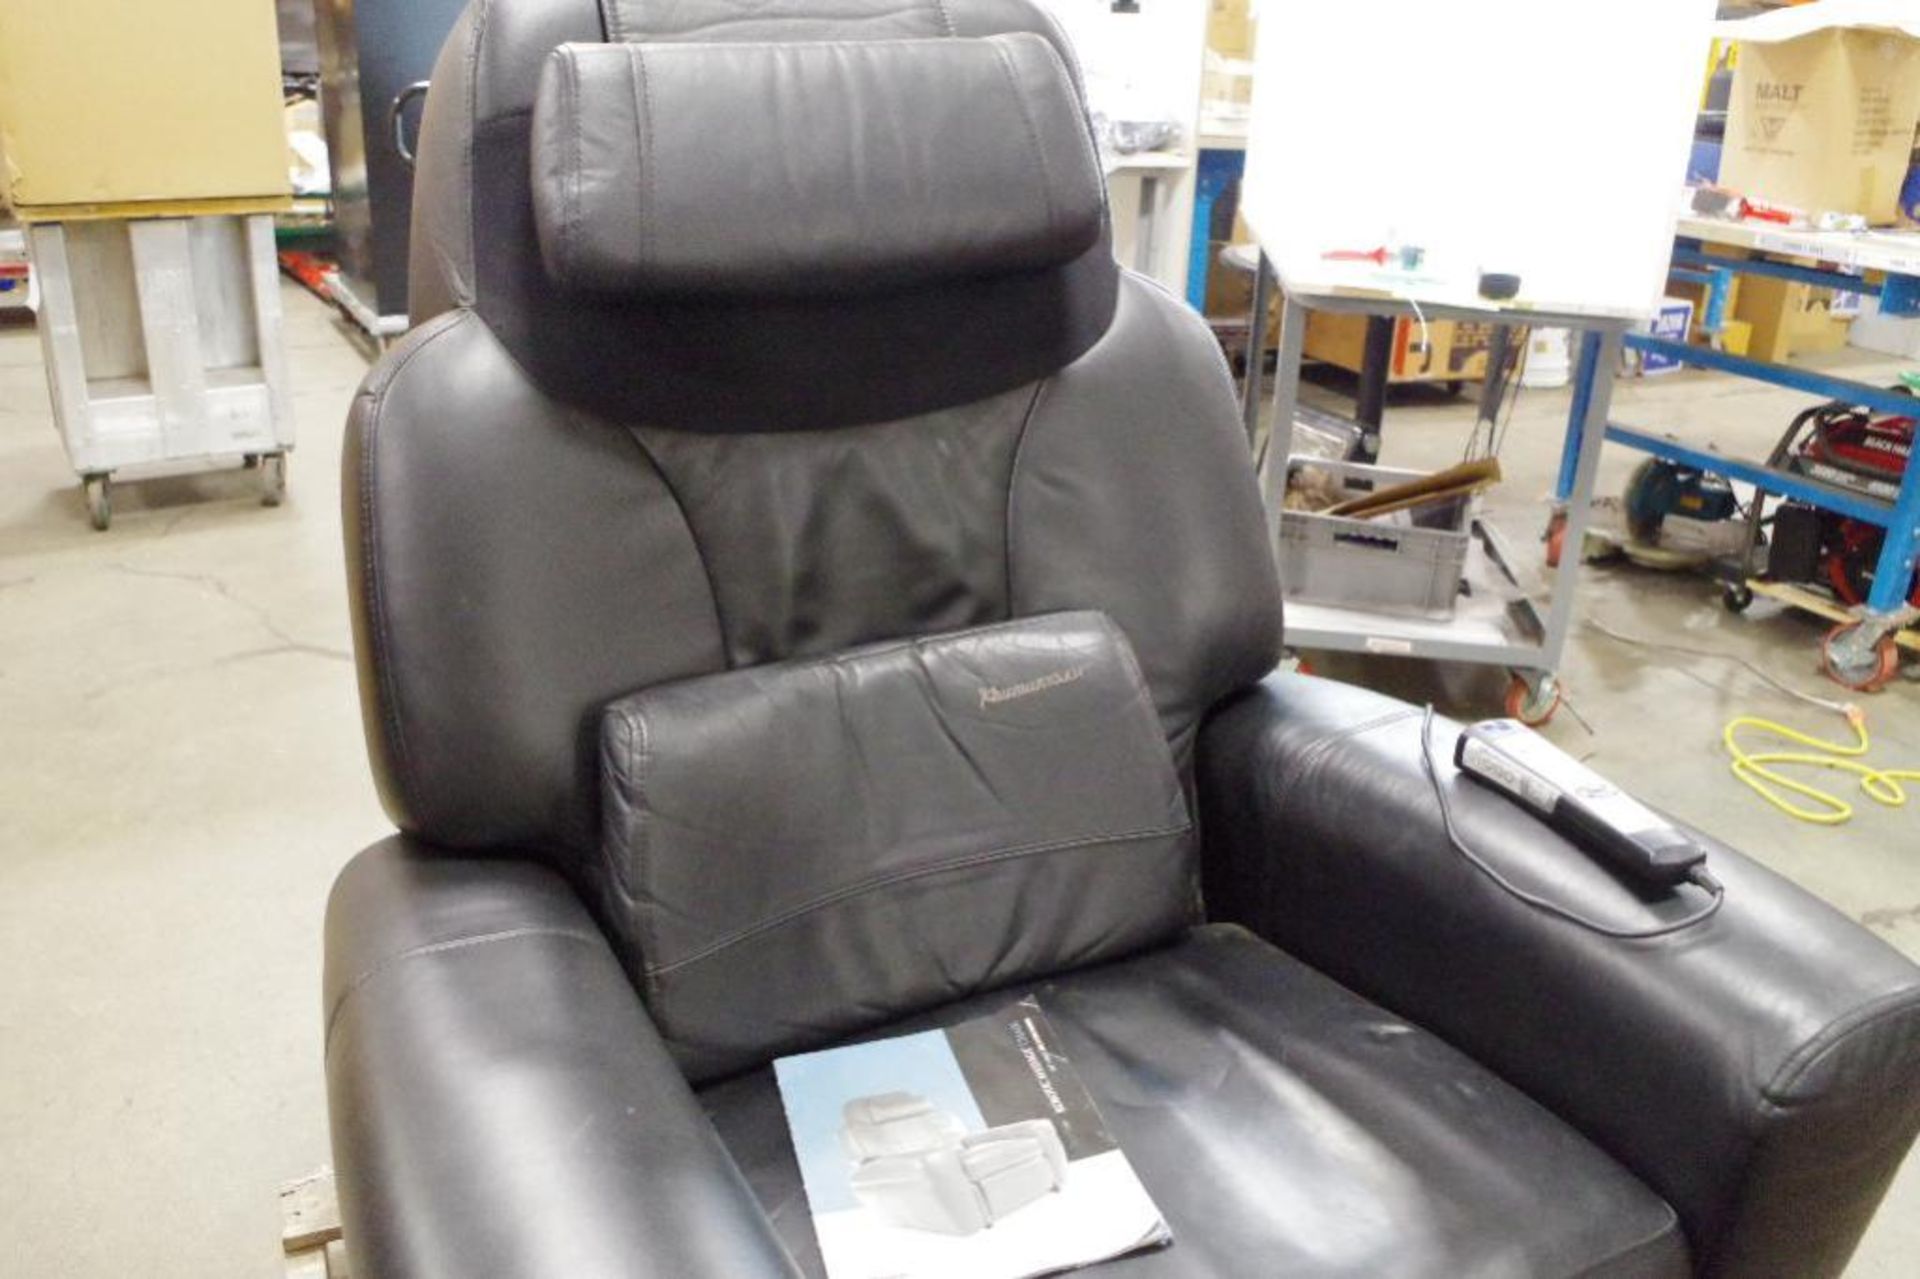 HUMAN TOUCH Robotic Massage Chair M/N HT-1650 - Image 9 of 12